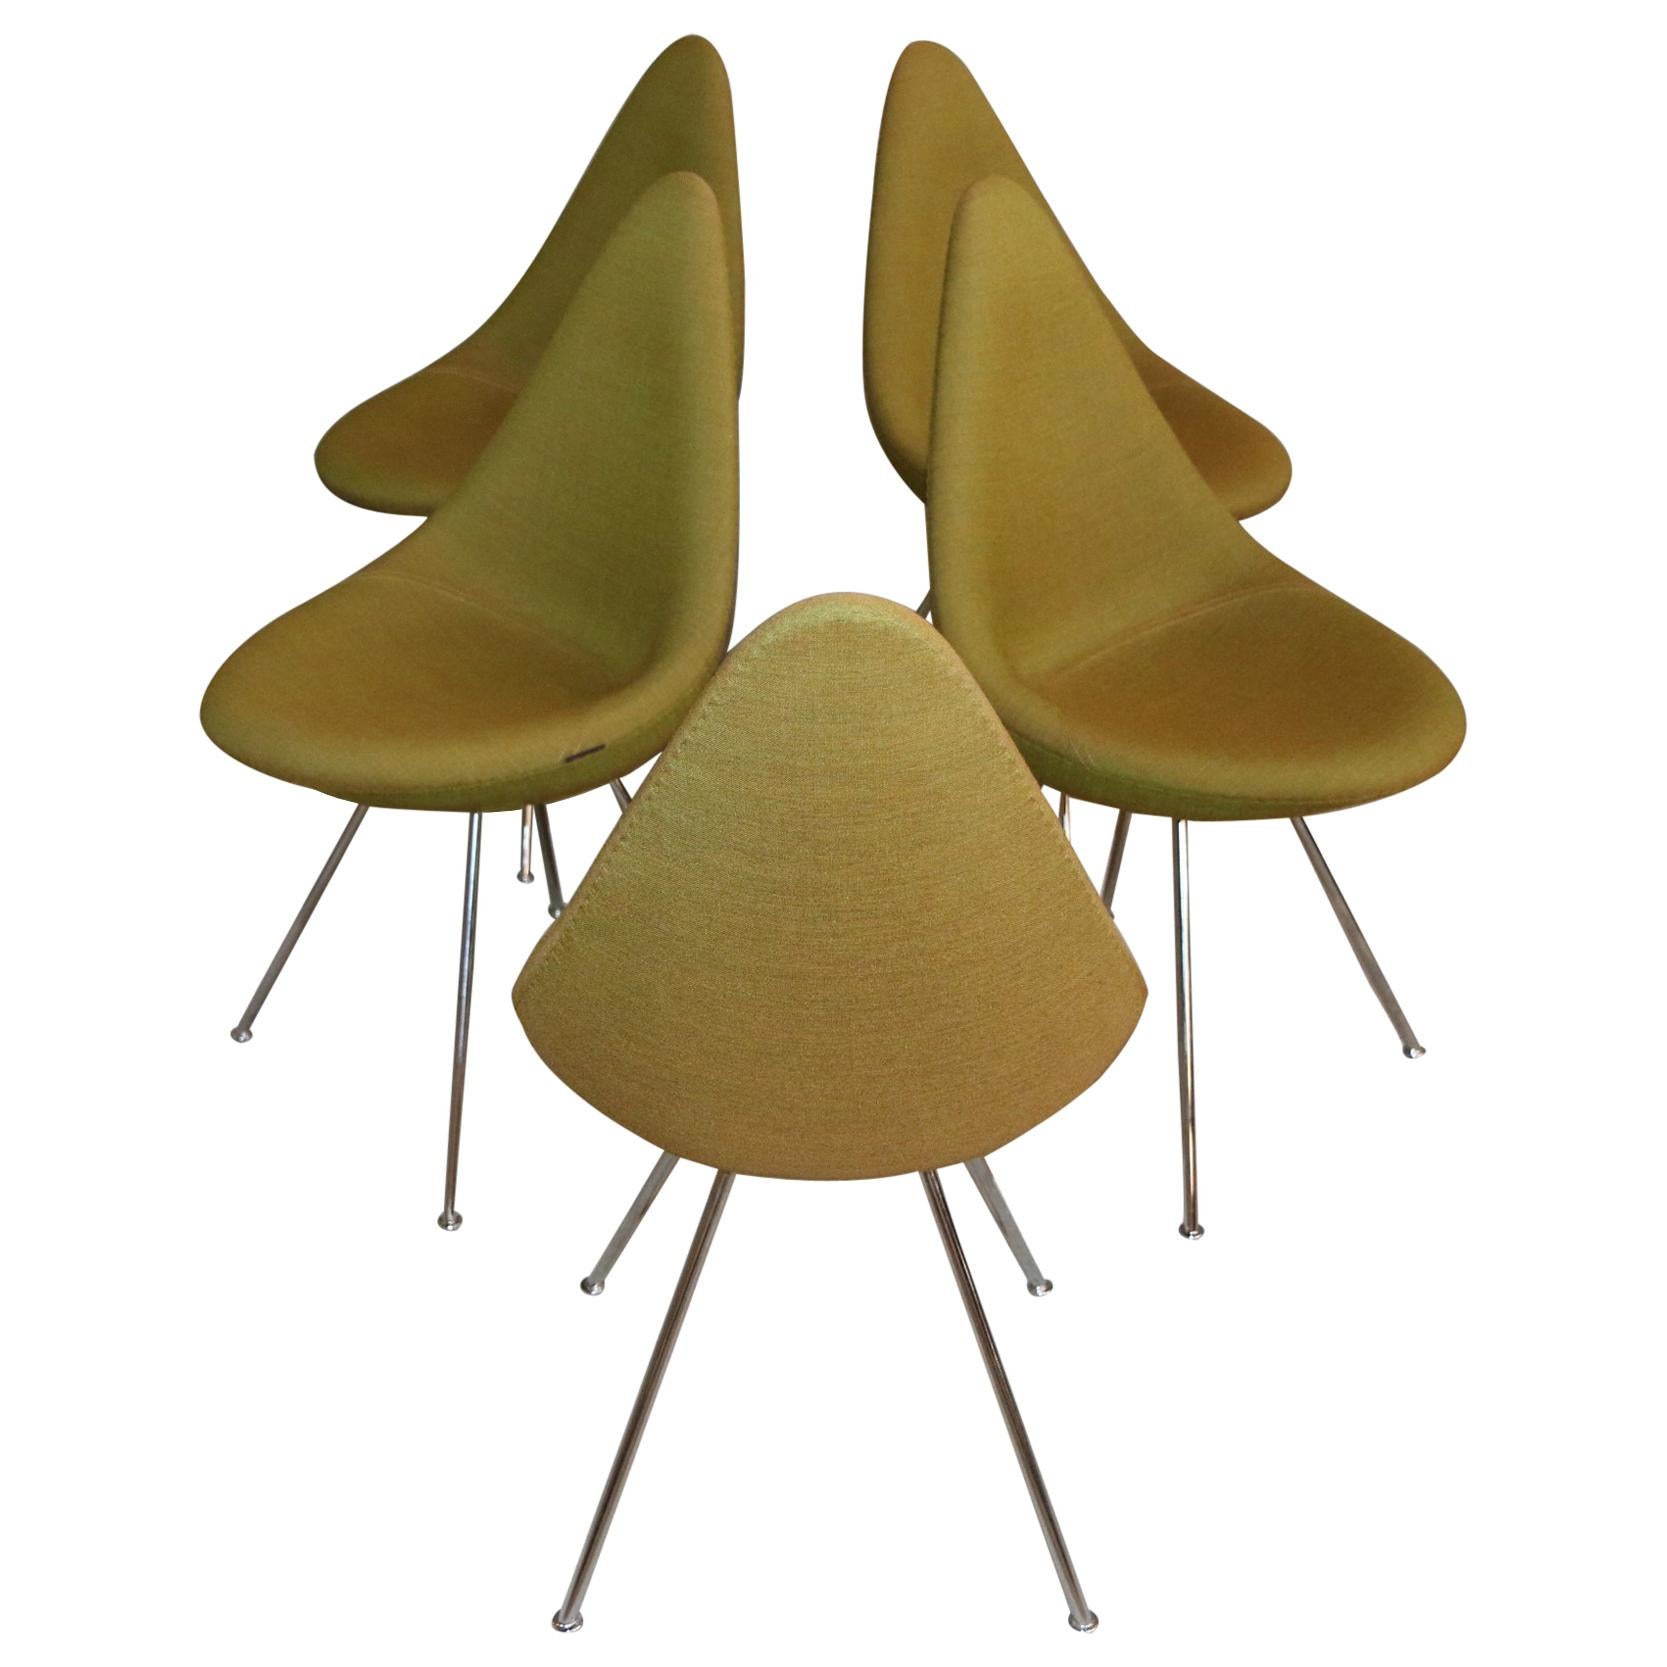 5 Vintage Drop Chairs by Fritz Hansen in Olive Green Fabric